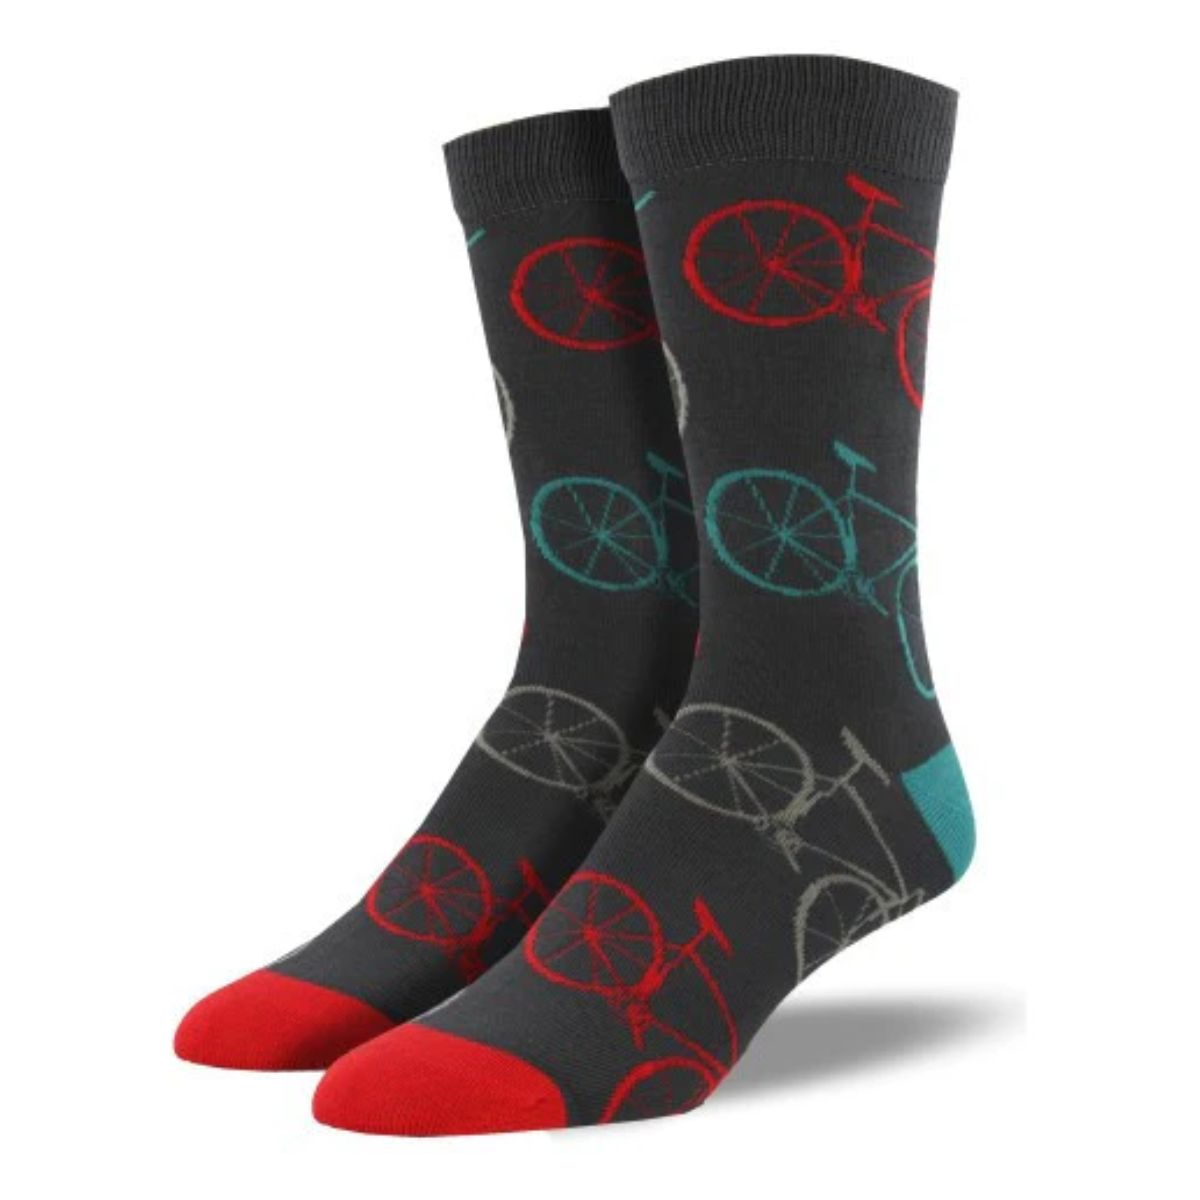 fixie socks a pair of charcoal grey crew socks with bicycle print